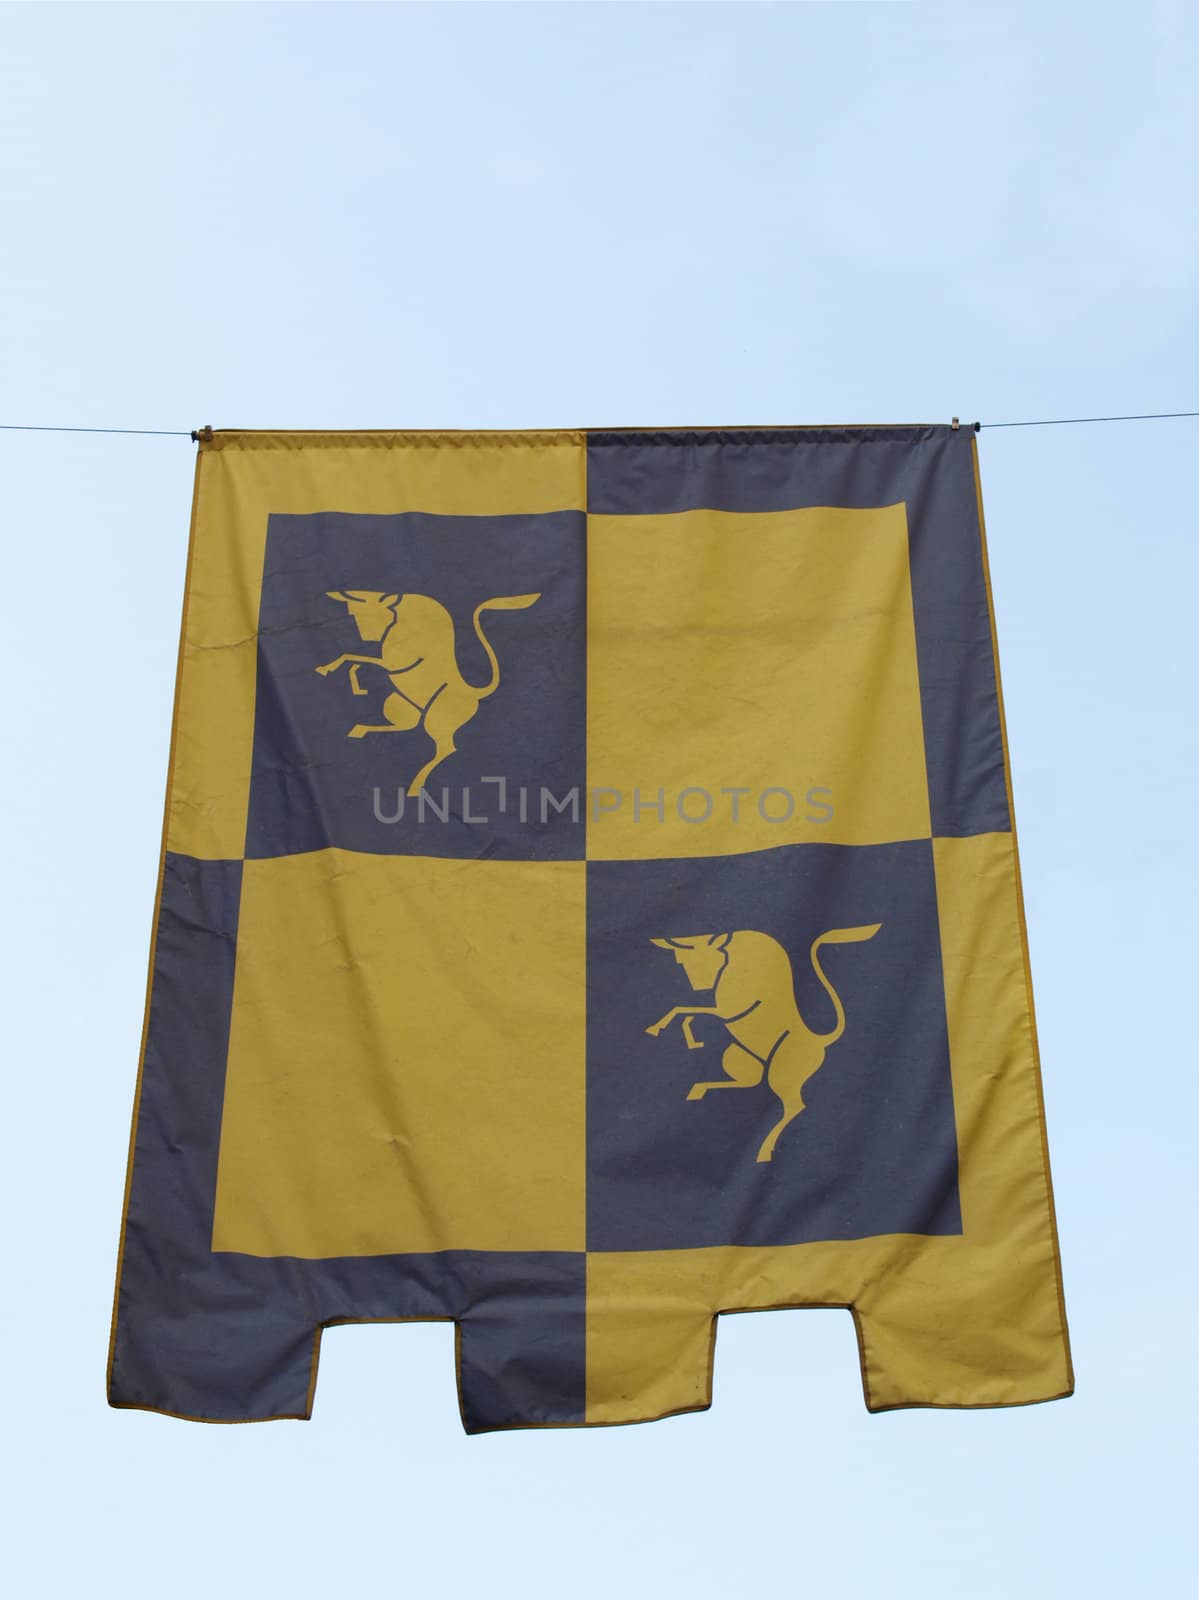 Symbol of Turin on an ancient medieval flag